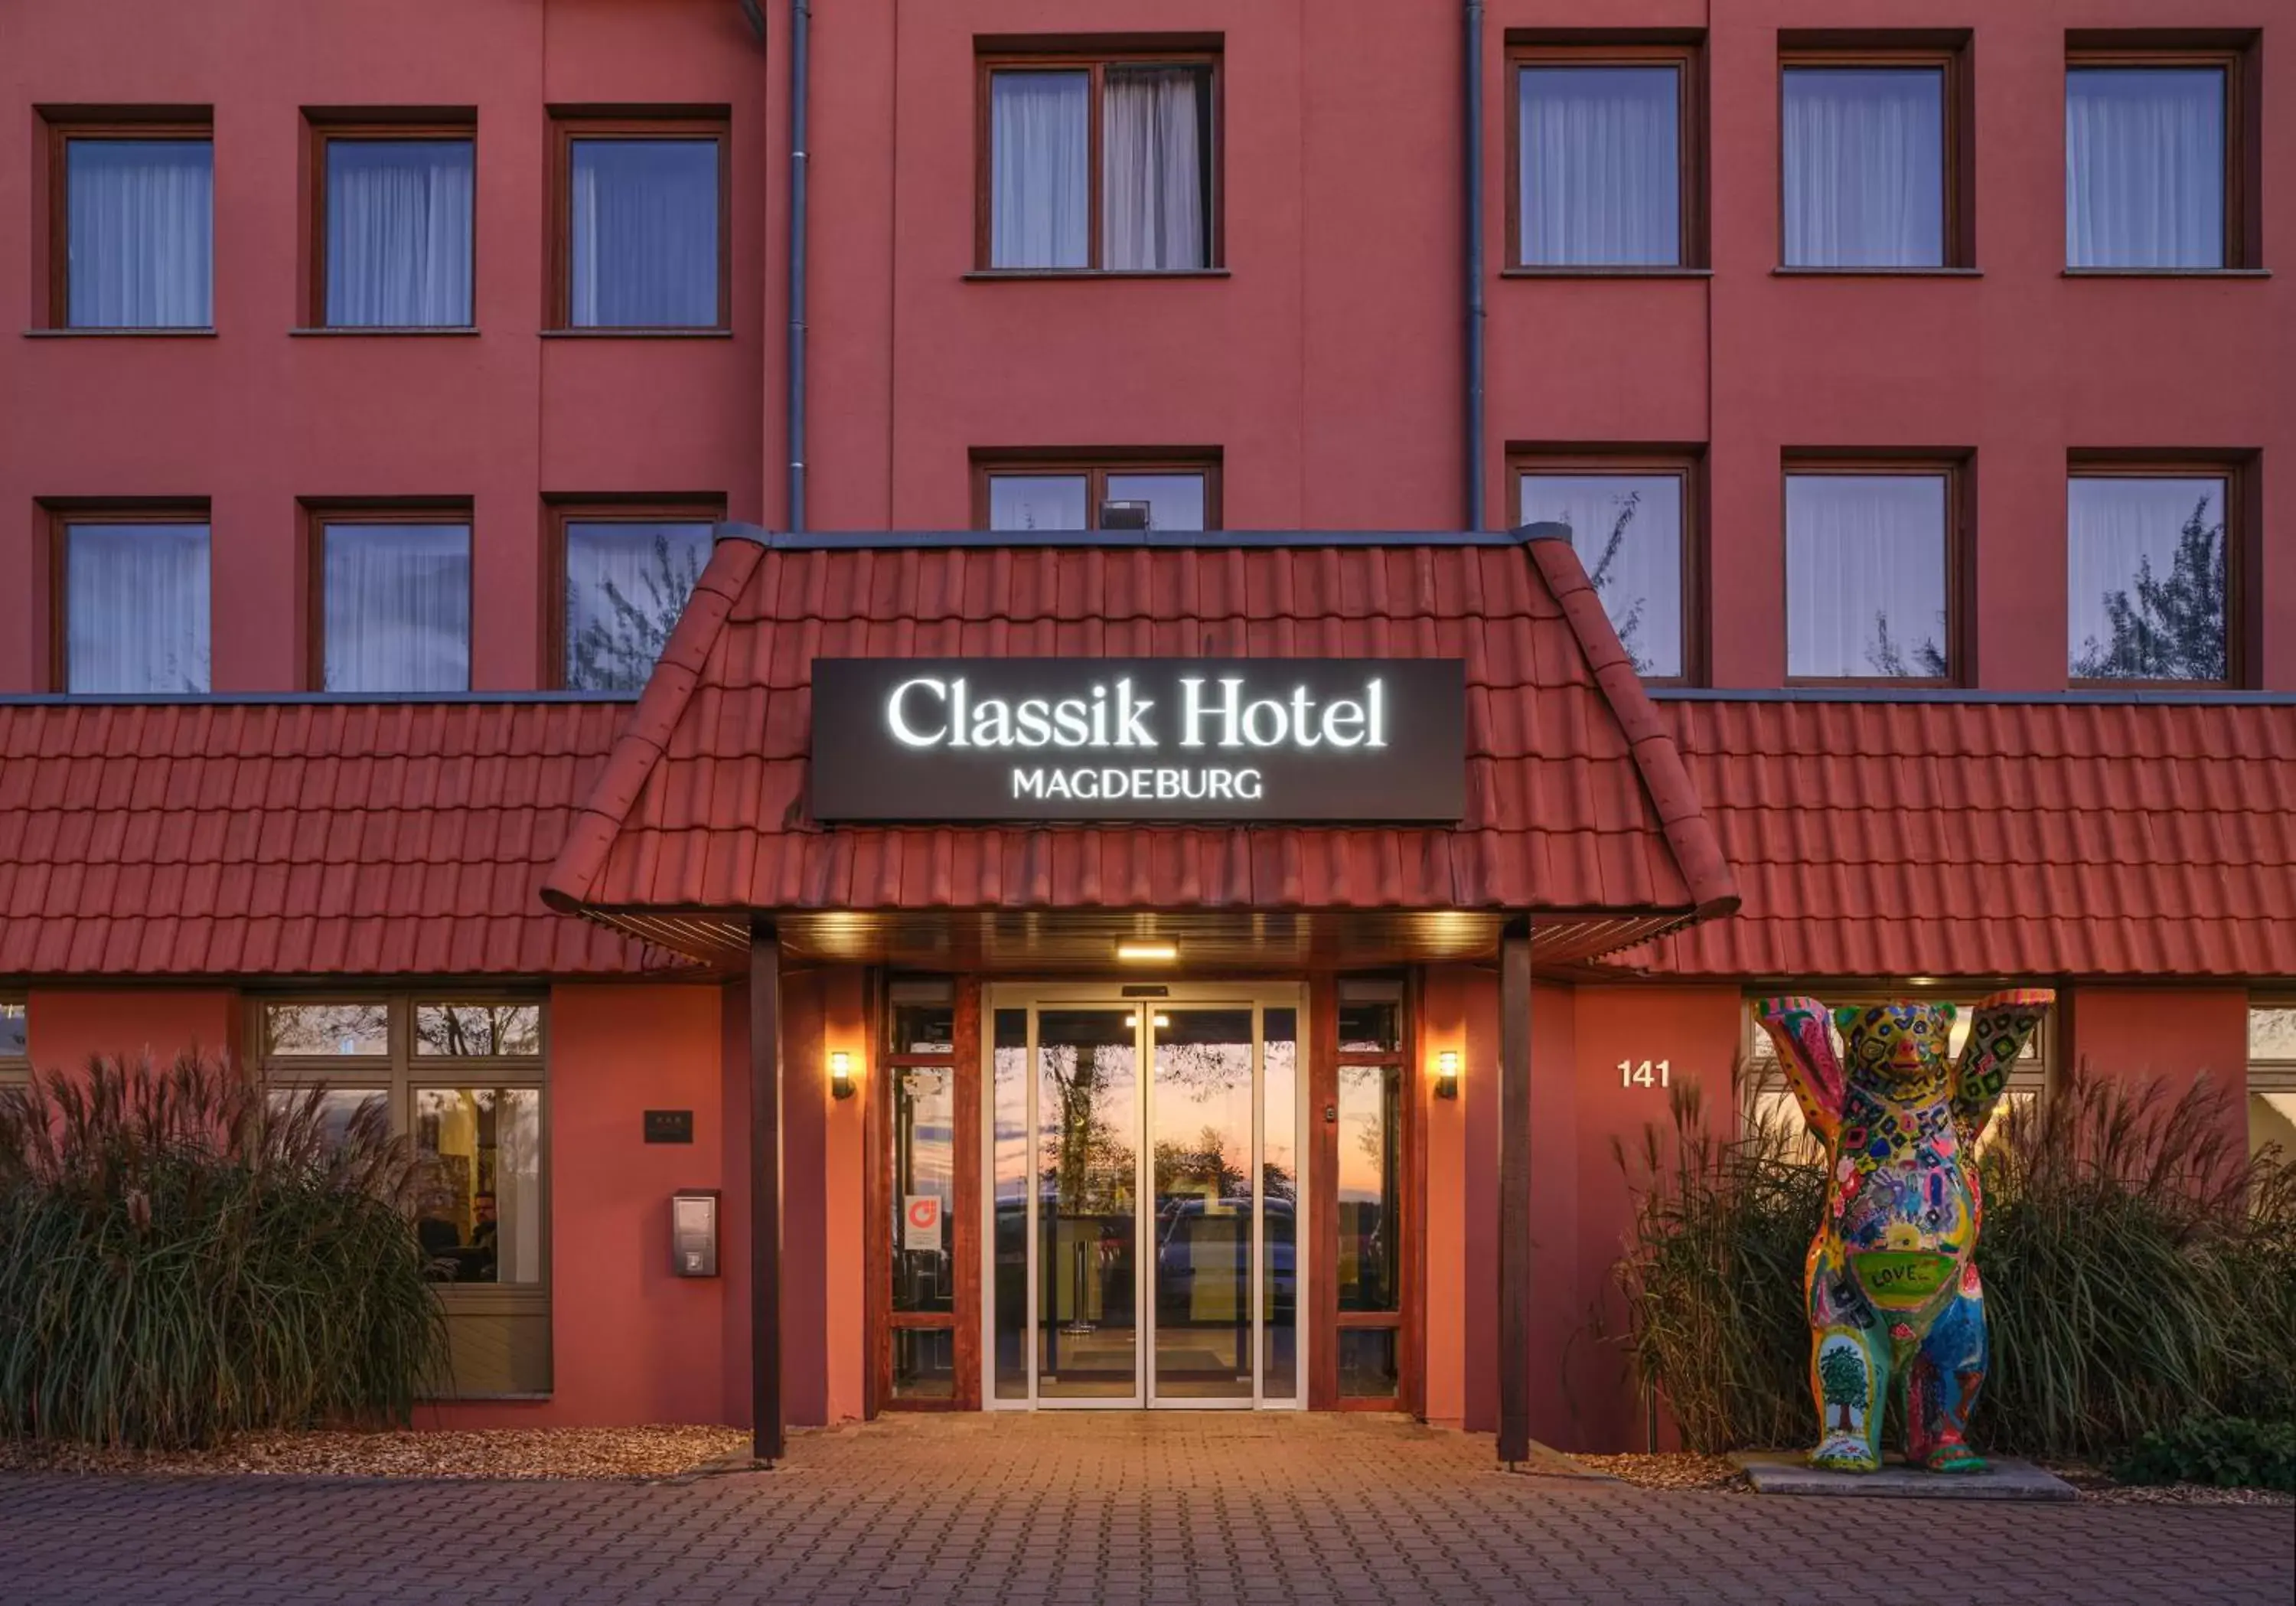 Property building in Classik Hotel Magdeburg